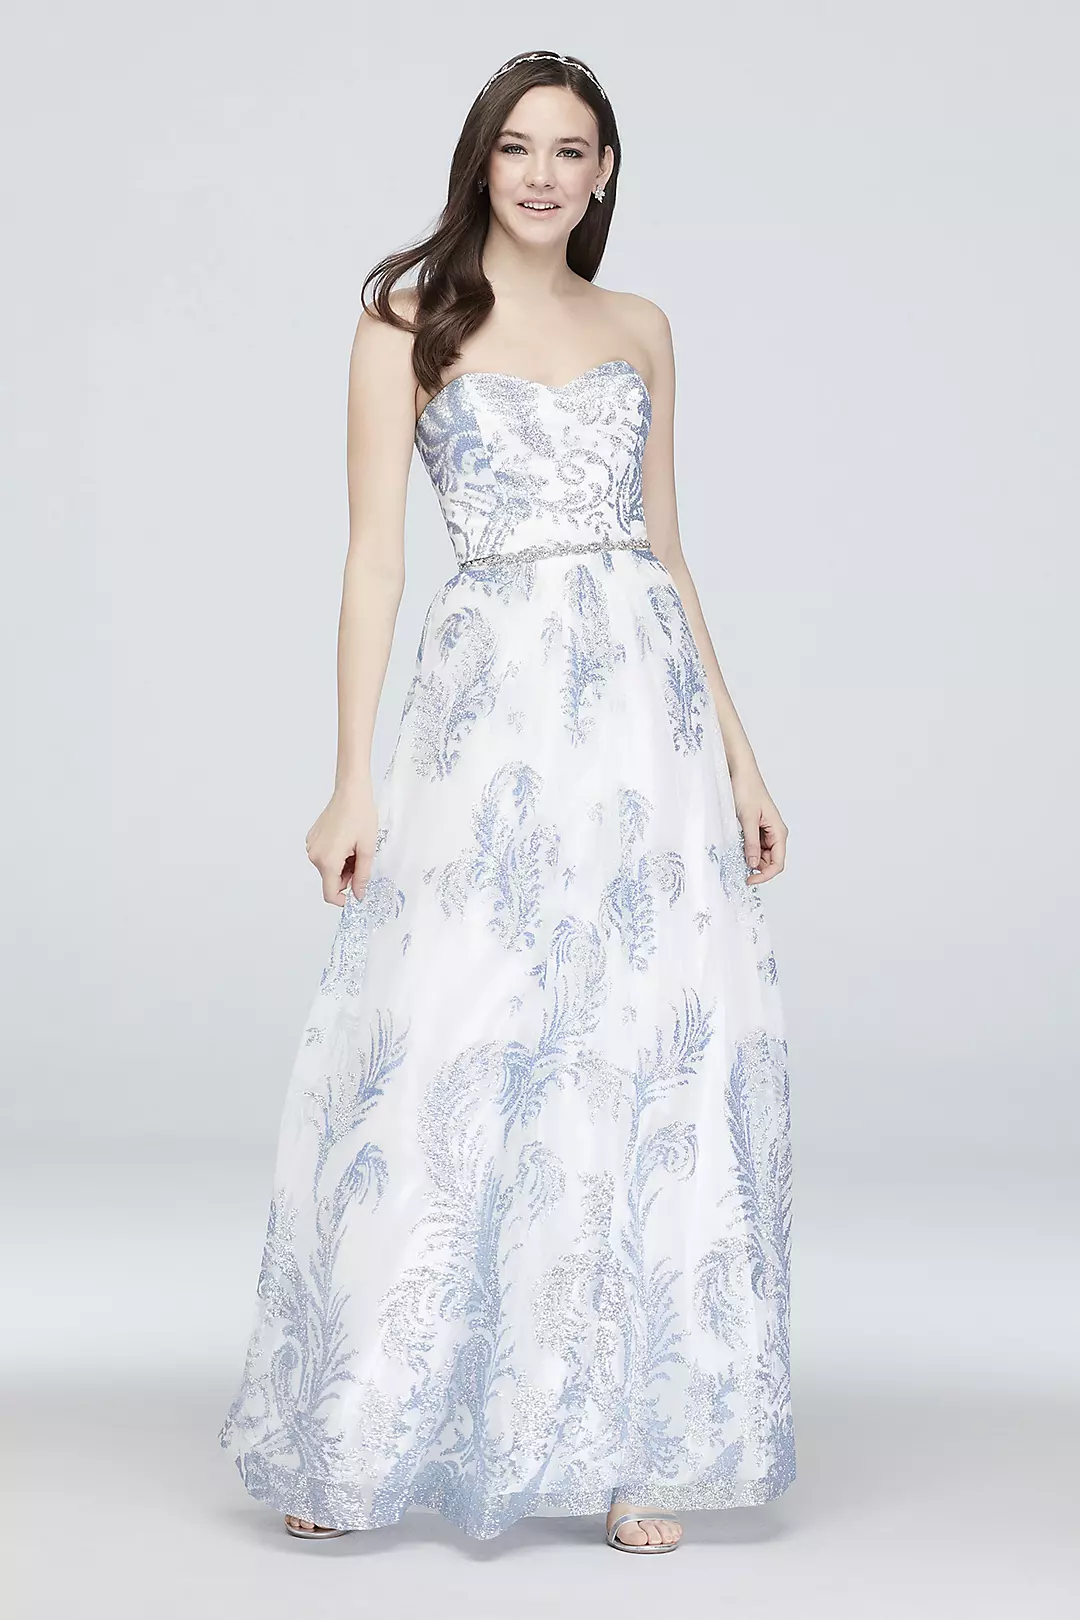 Strapless Glitter Brocade Tulle Ball Gown | David's Bridal